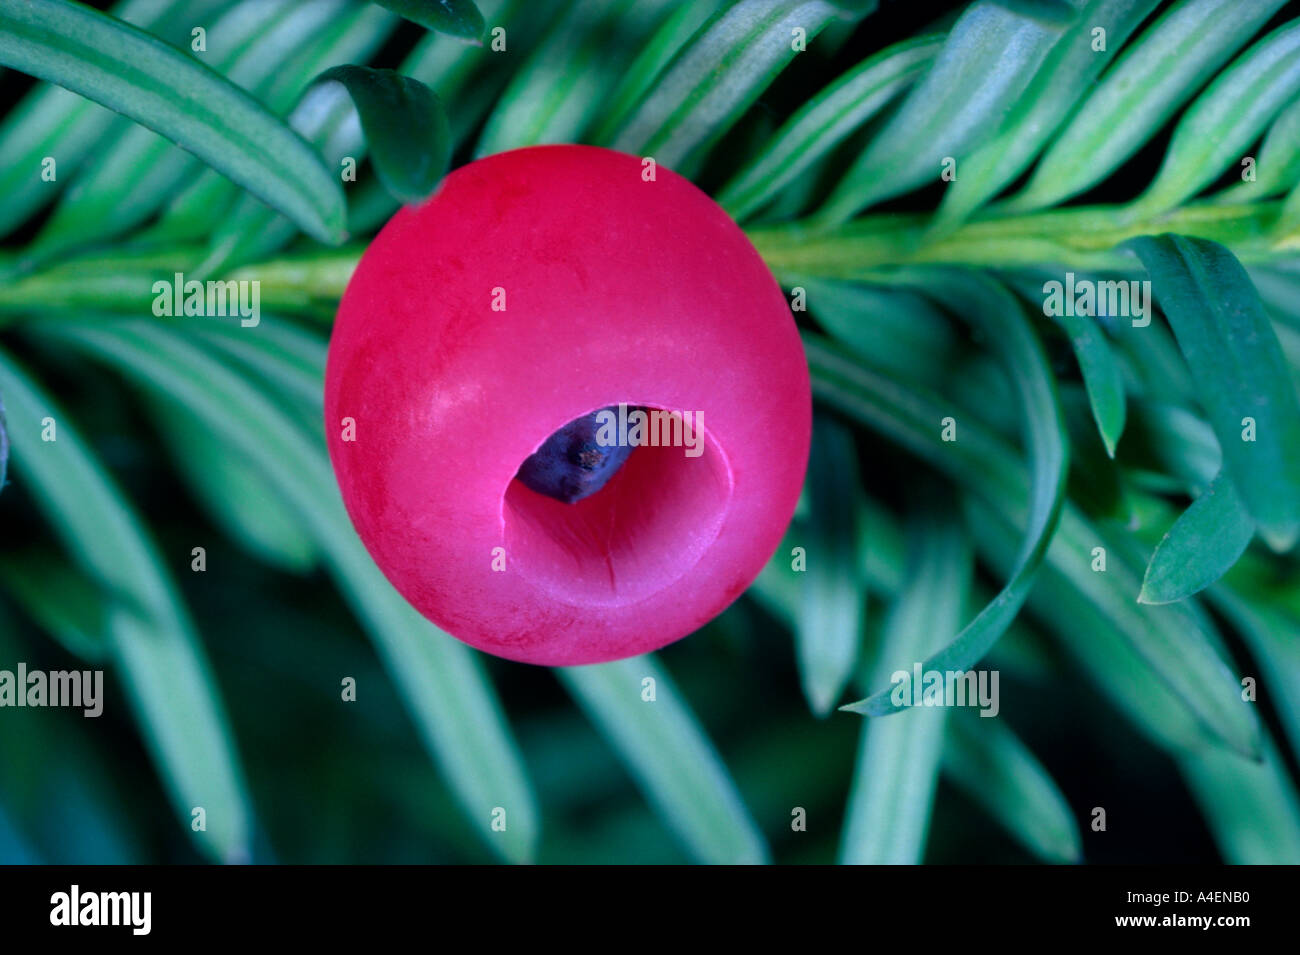 Red Yew tree berry. Magnified 3x lifesize. Stock Photo